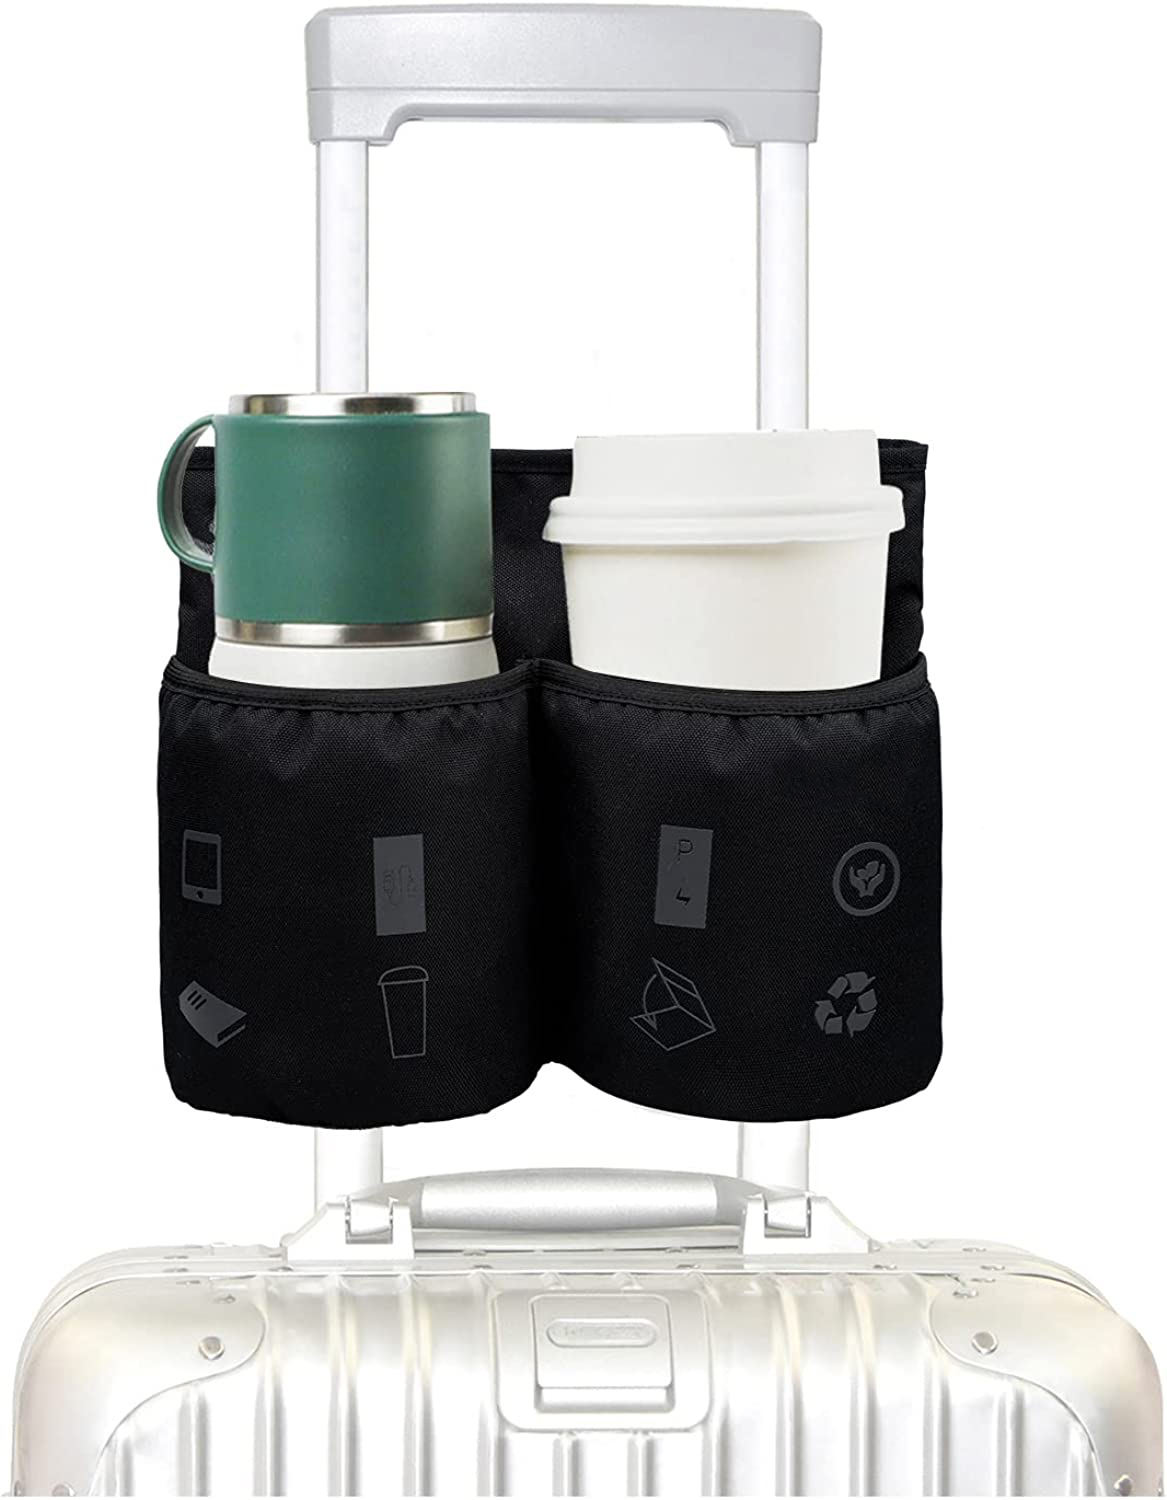 Waterproof Luggage Travel Cup Holder With Thermal Insulation Phone Pocket Free Your Hand Coffee Cup Carrier